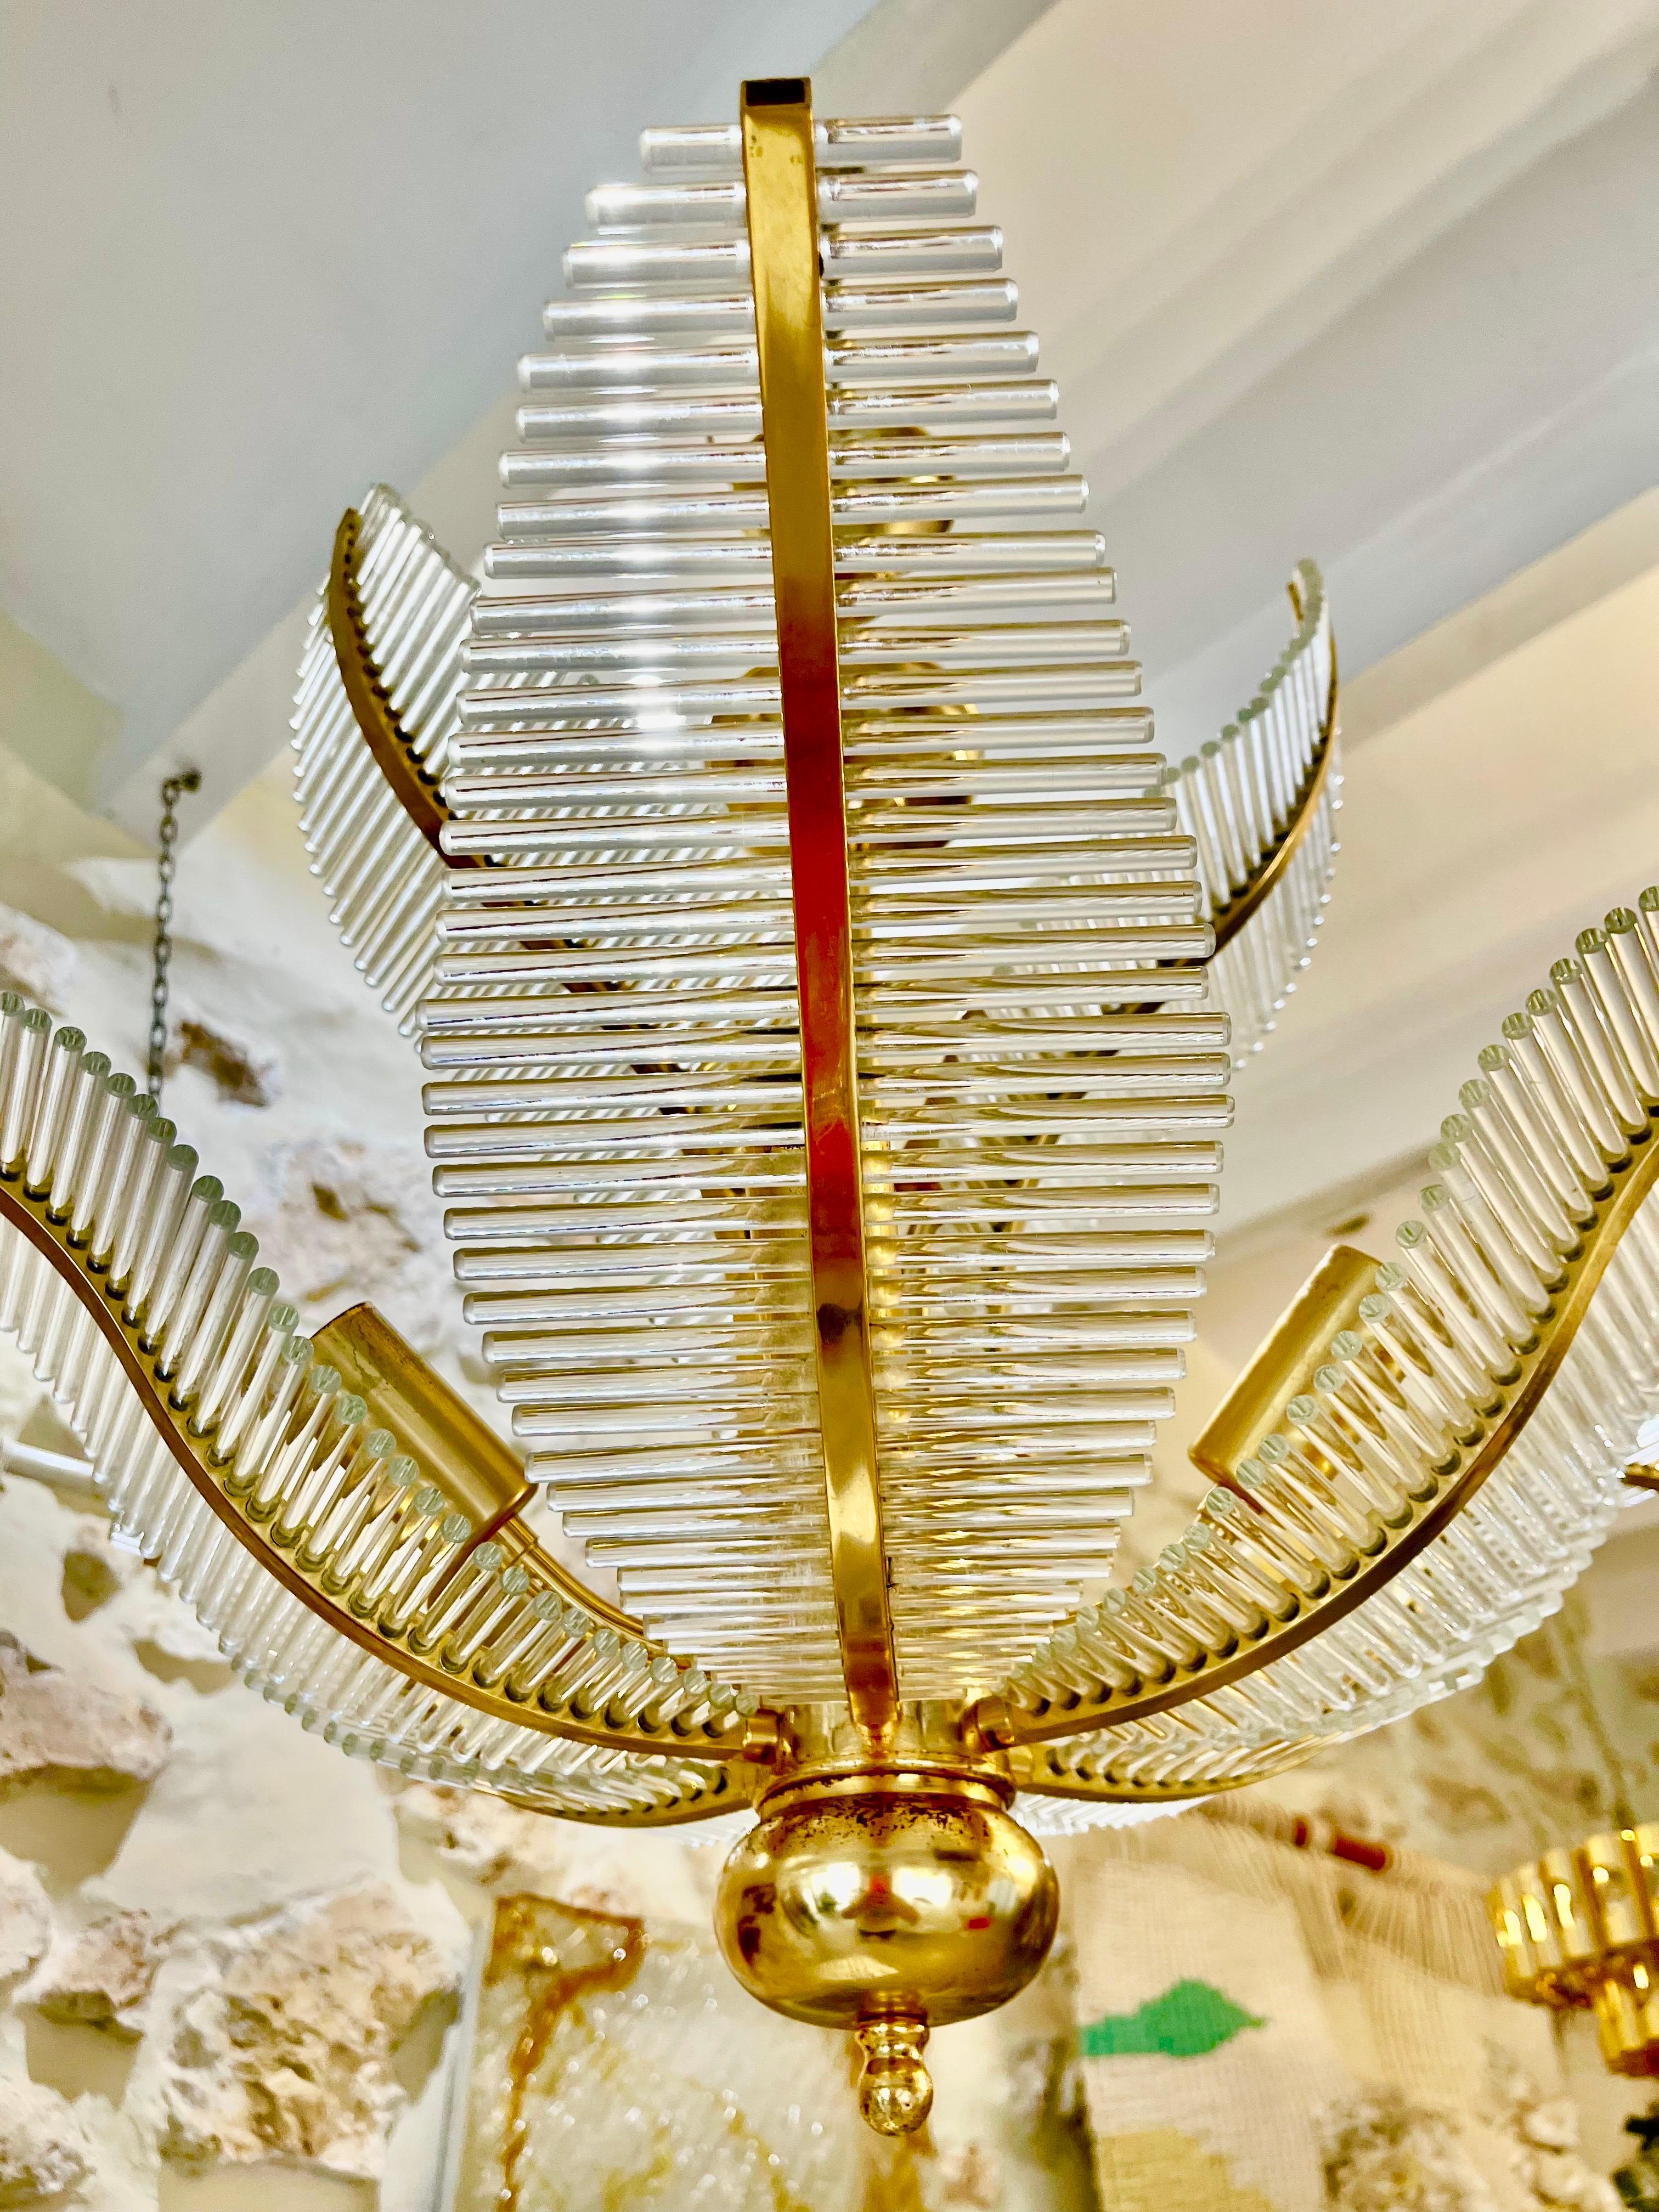 Exceptional Venini PALM chandelier with tube Murano glass with gilded gold structure. The design and the quality of the glass make this piece the best of Italian design.

This unique PALM chandelier by Venini in murano glass is exceptional.
discount